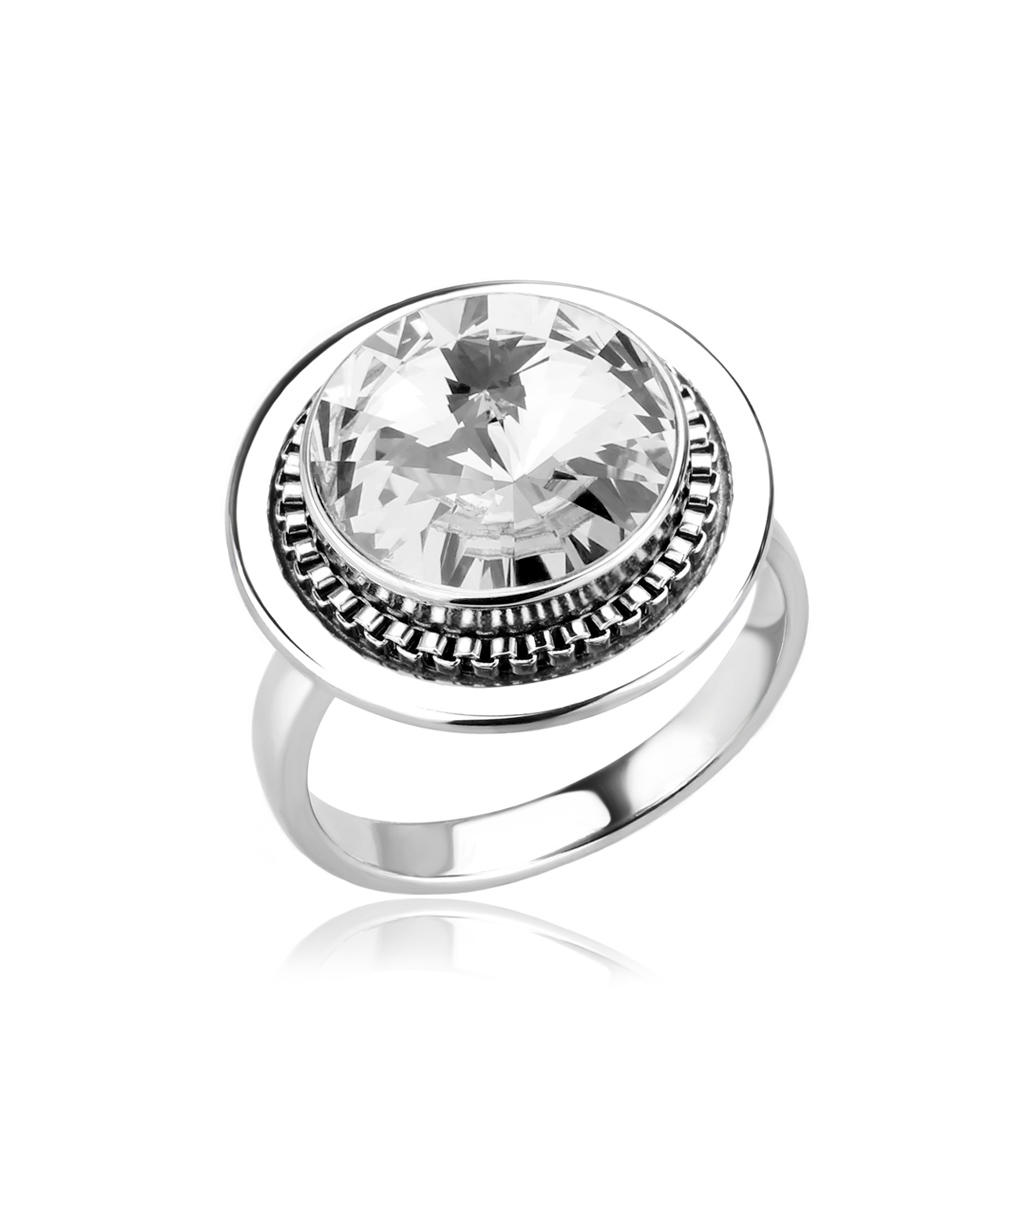 Stainless steel ring with Swarovski crystal